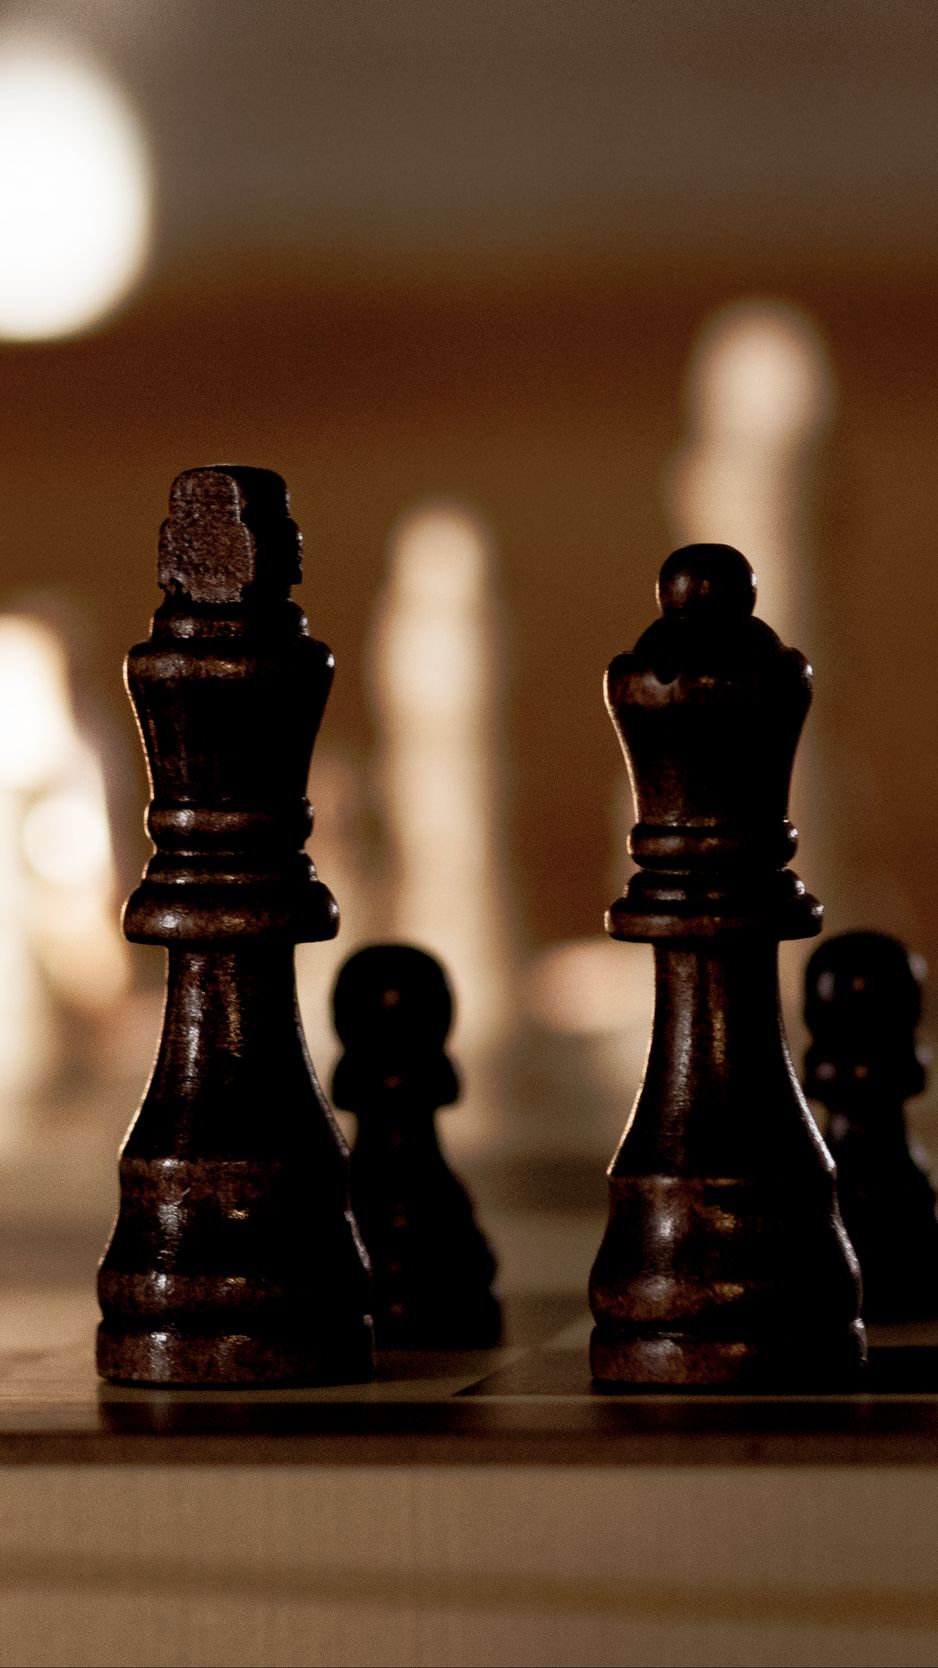 Download wallpaper 938x1668 chess, board, pieces, king, queen, game iphone  8/7/6s/6 for parallax hd background